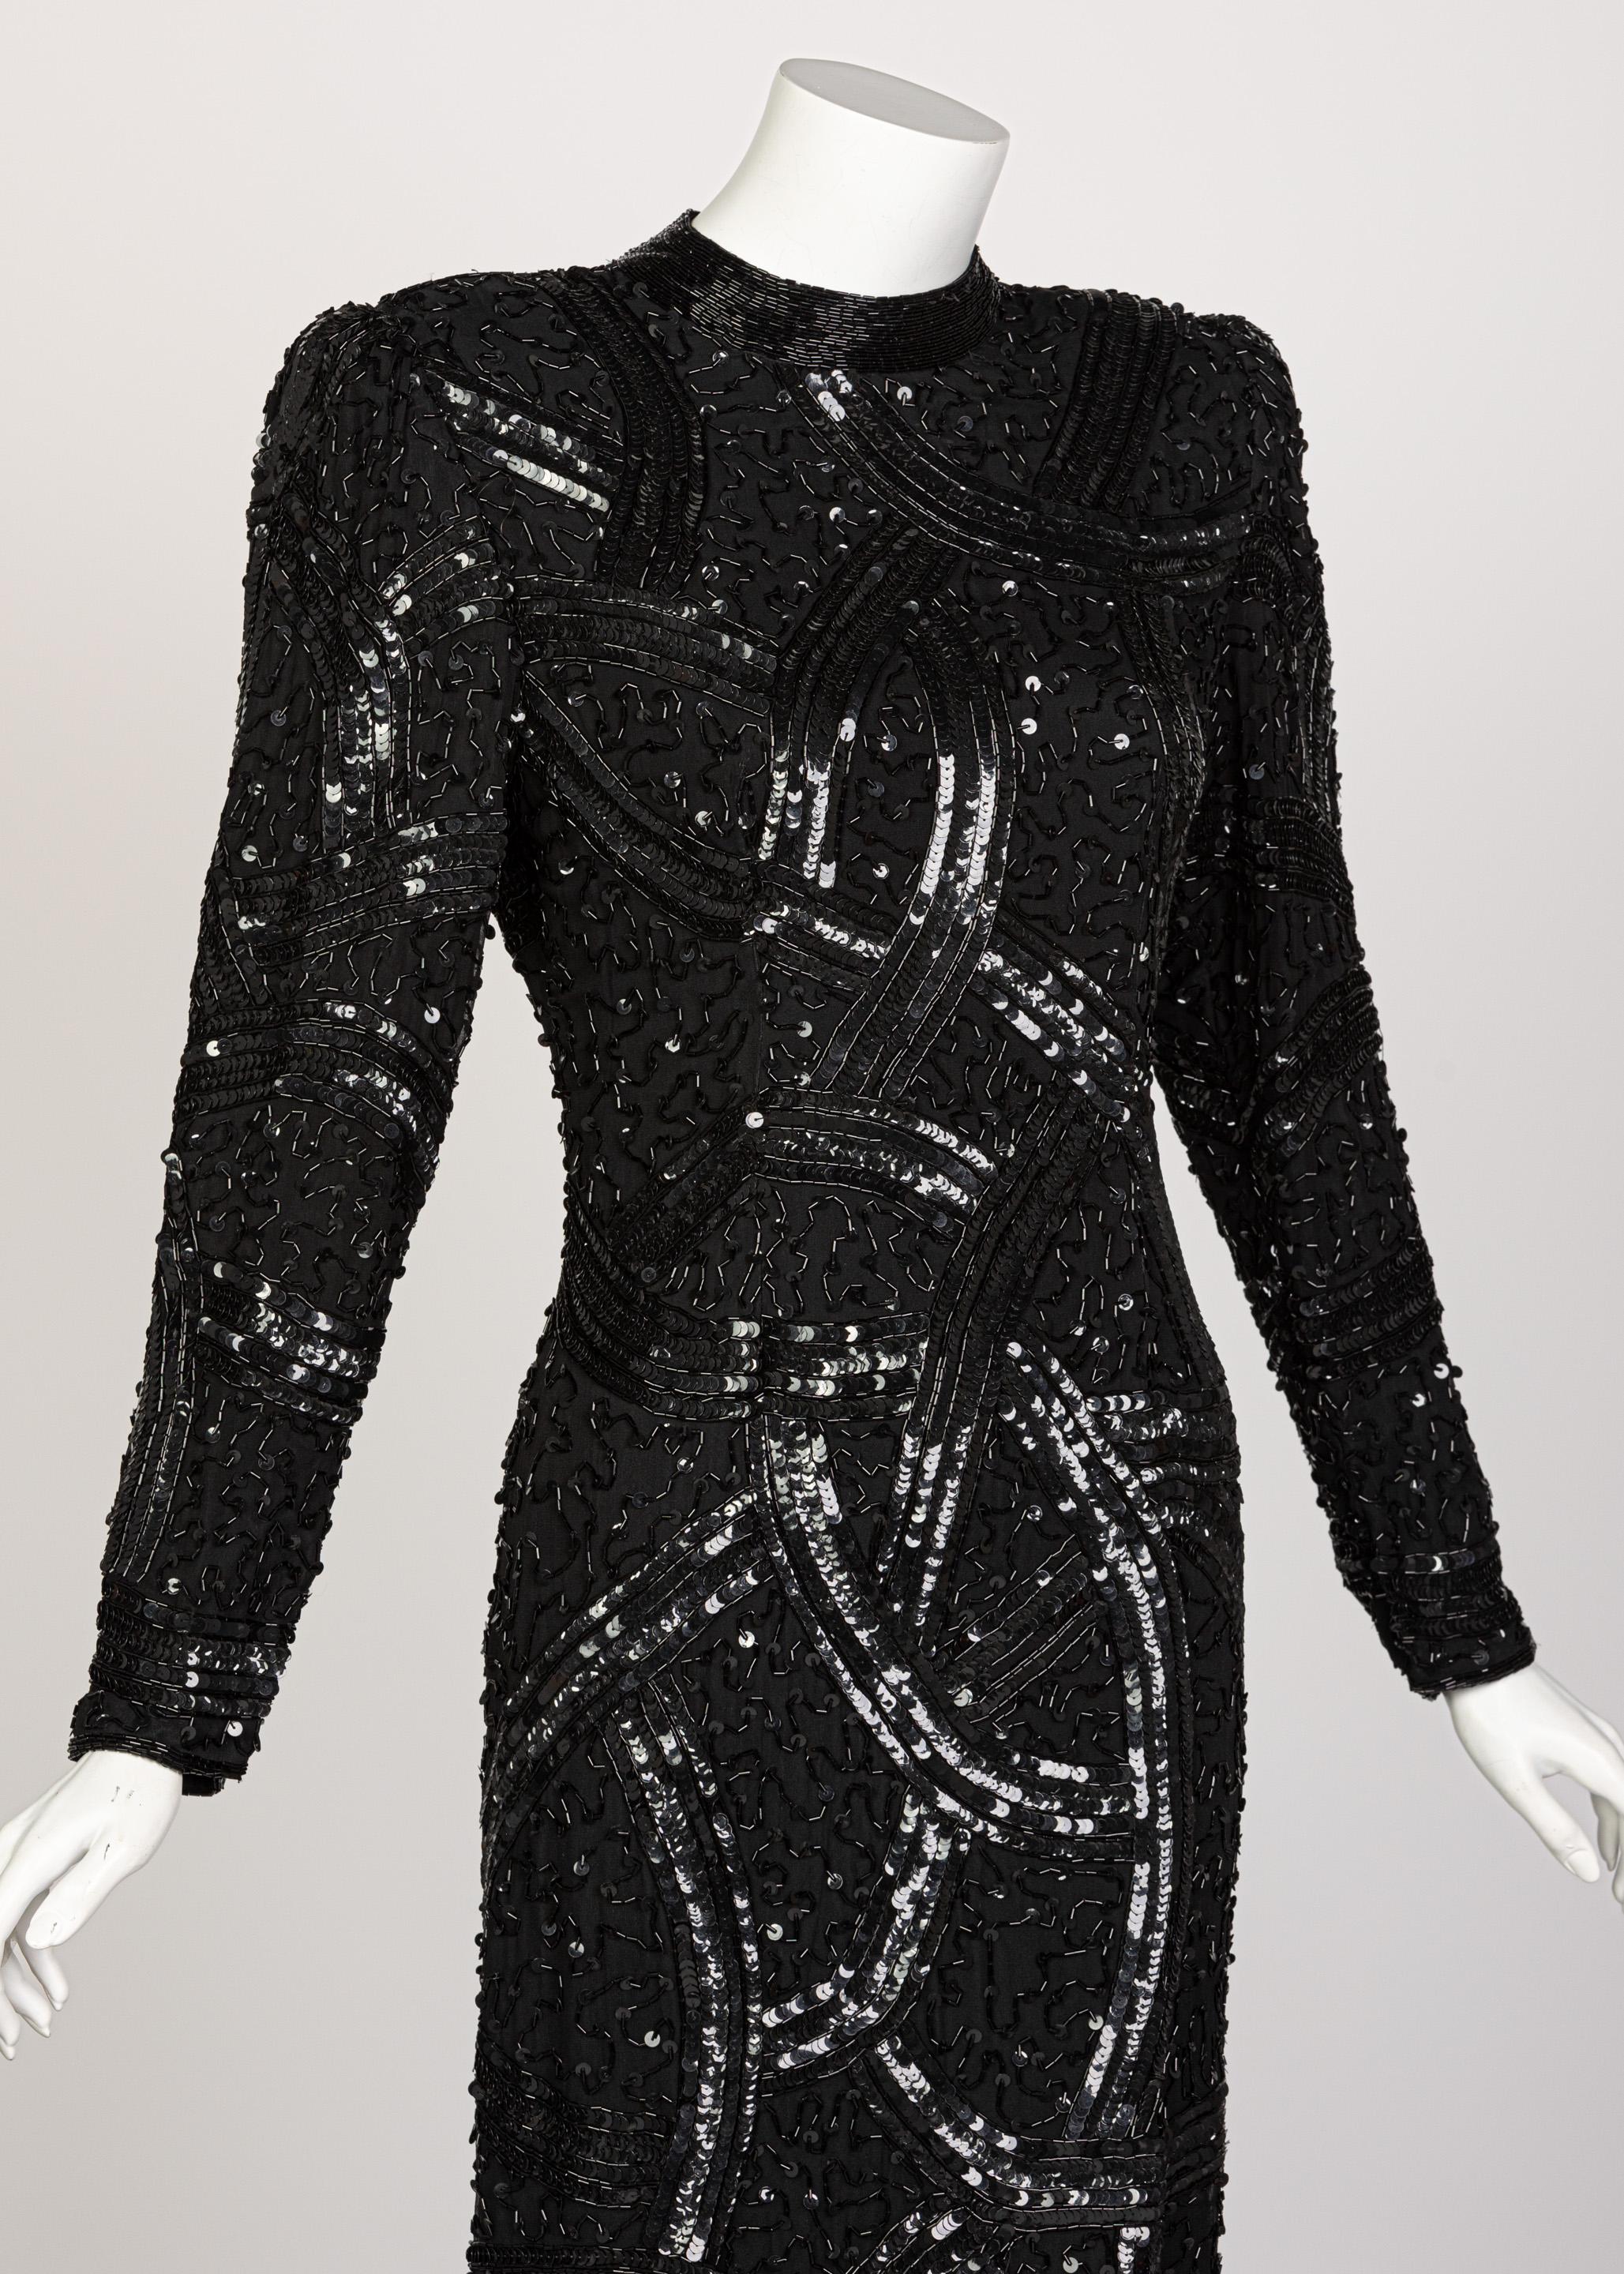 Bob Mackie Attributed Black Beaded Sequins Dress, 1980s In Excellent Condition For Sale In Boca Raton, FL